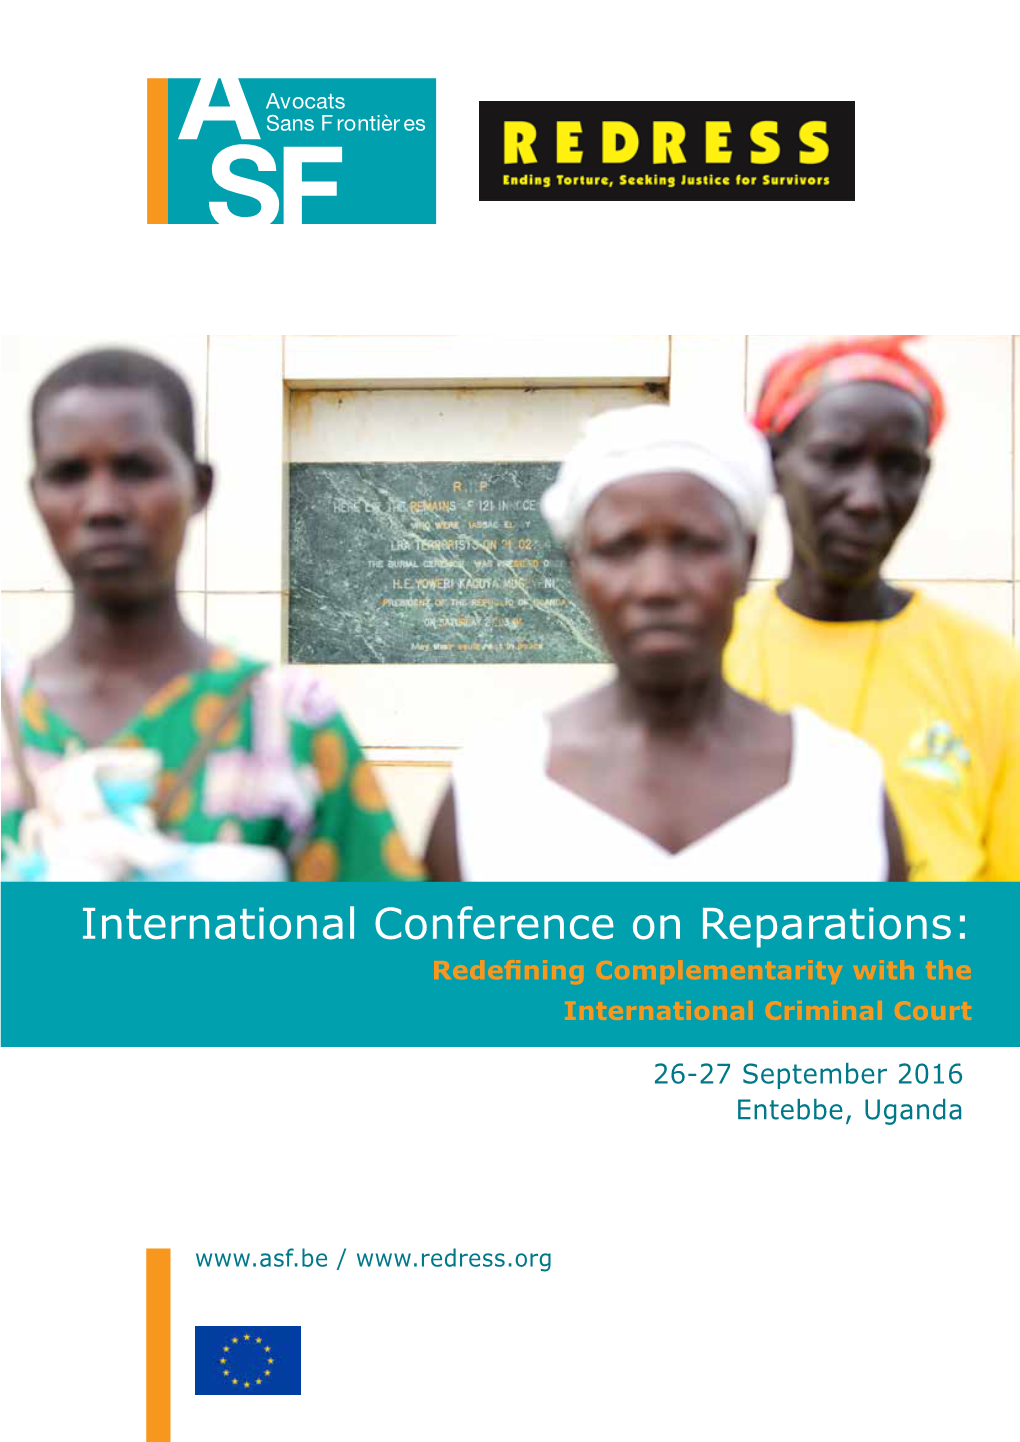 International Conference on Reparations: Redefining Complementarity with the International Criminal Court